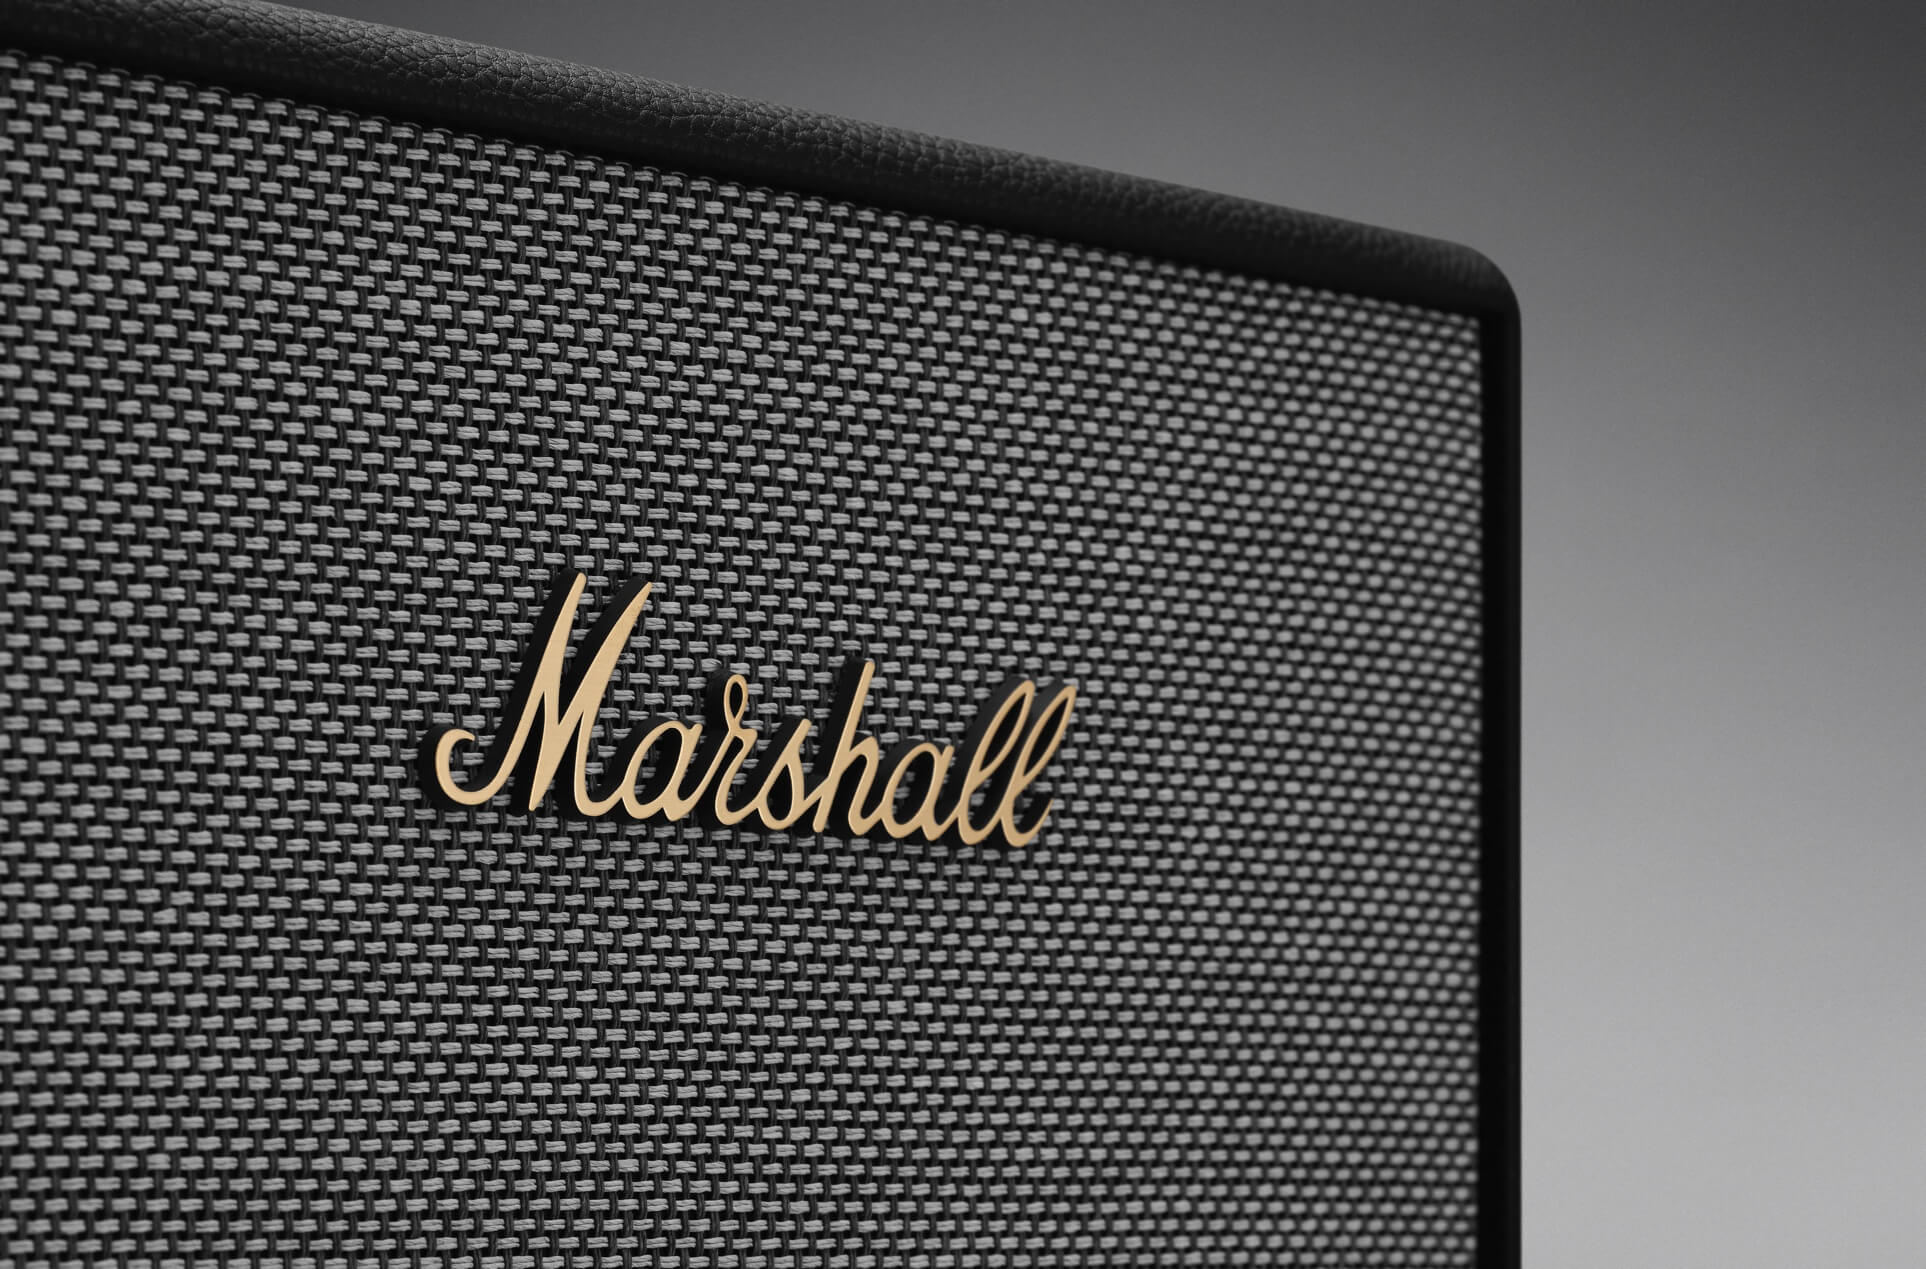 Up to 70% off Certified Refurbished Marshall Stanmore II Bluetooth Speaker